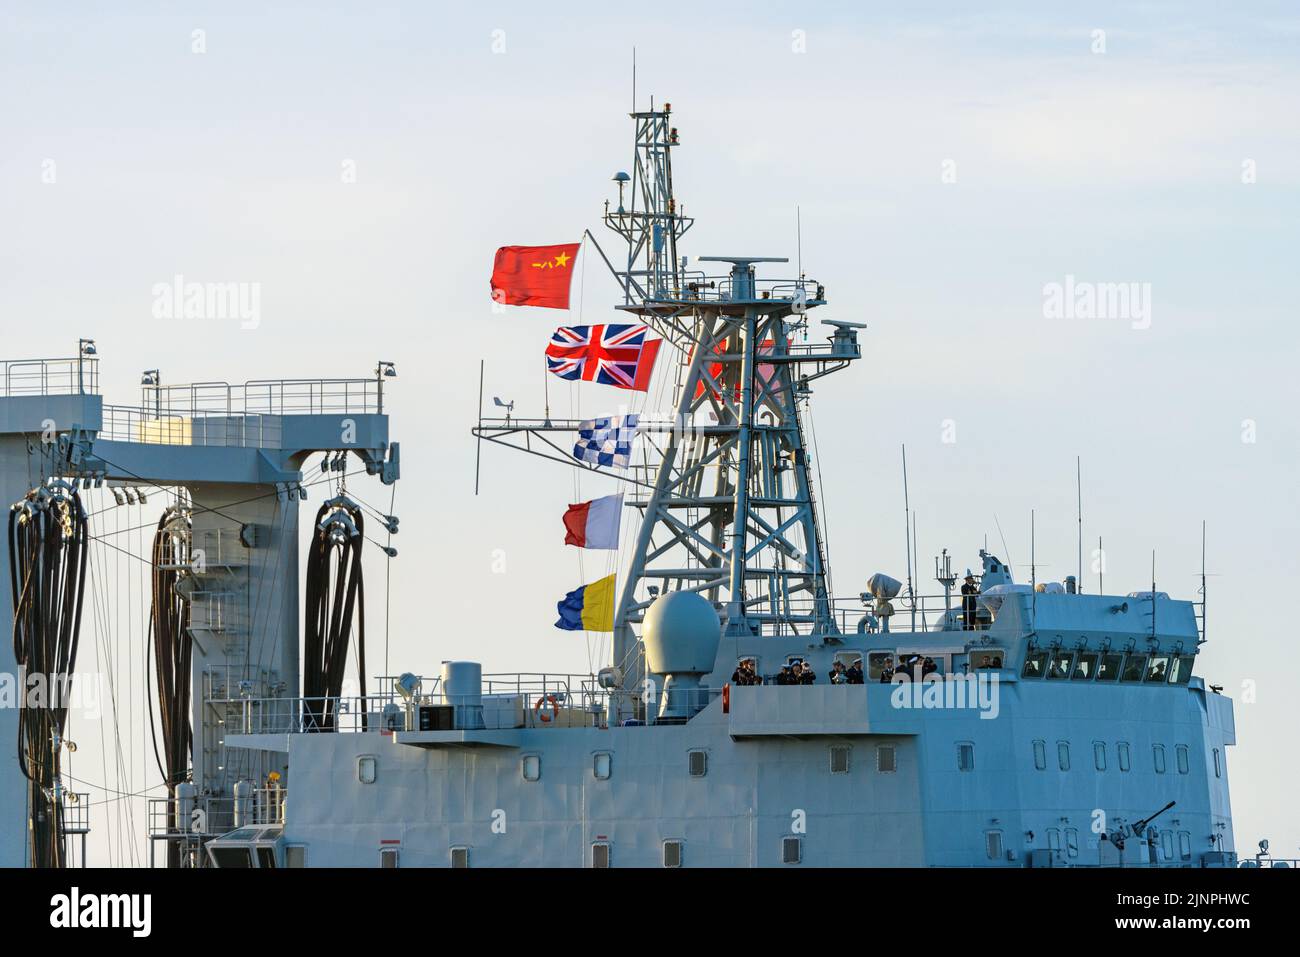 A Peoples Liberation Army Ensign and callsign flags flying from a Chinese warship - January 2015. Stock Photo